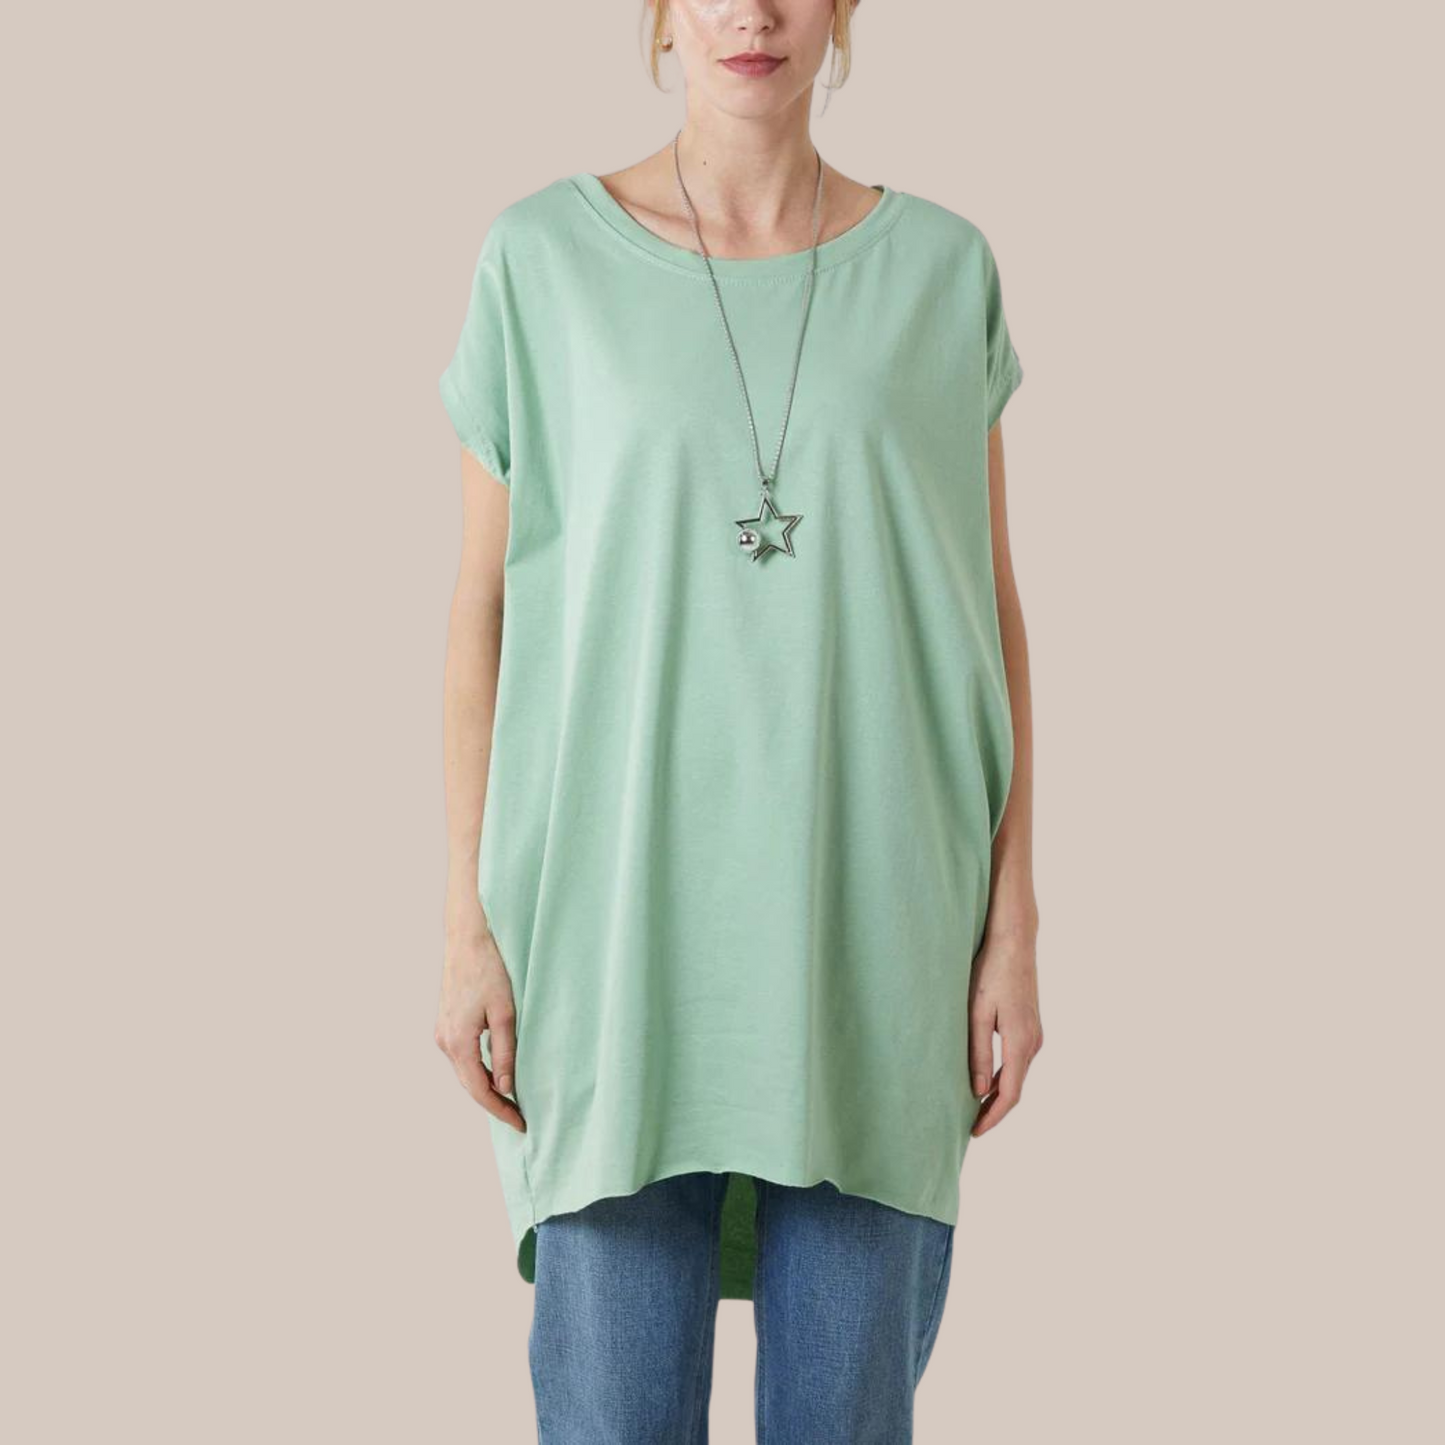 Long t-shirts. Available in other colours